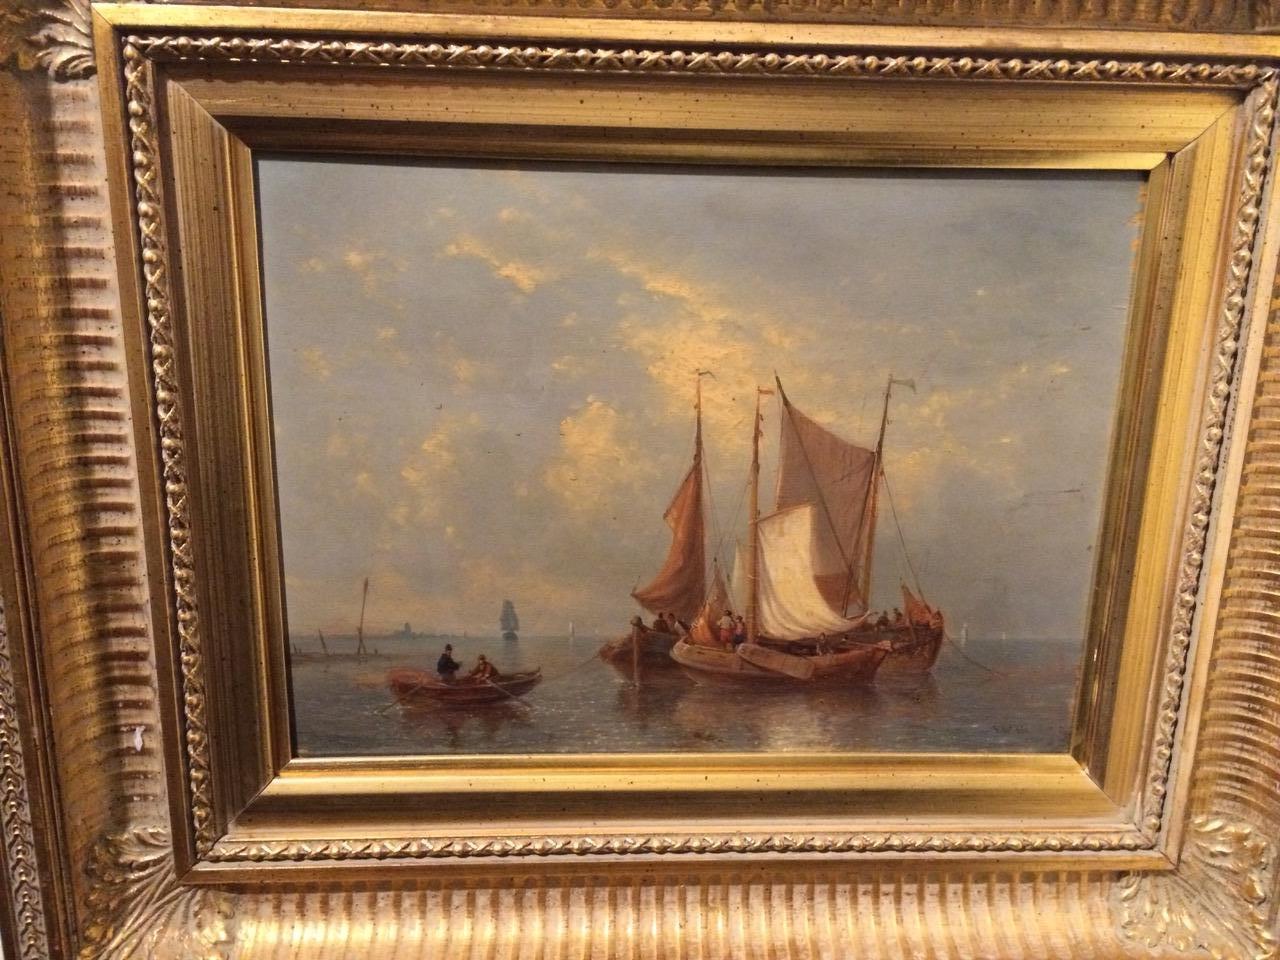 Sailing Vessels in Calm Seas Offshore - Sailboat Sail Boat 19th cent oil/panel  - Painting by George Willem Opdenhoff